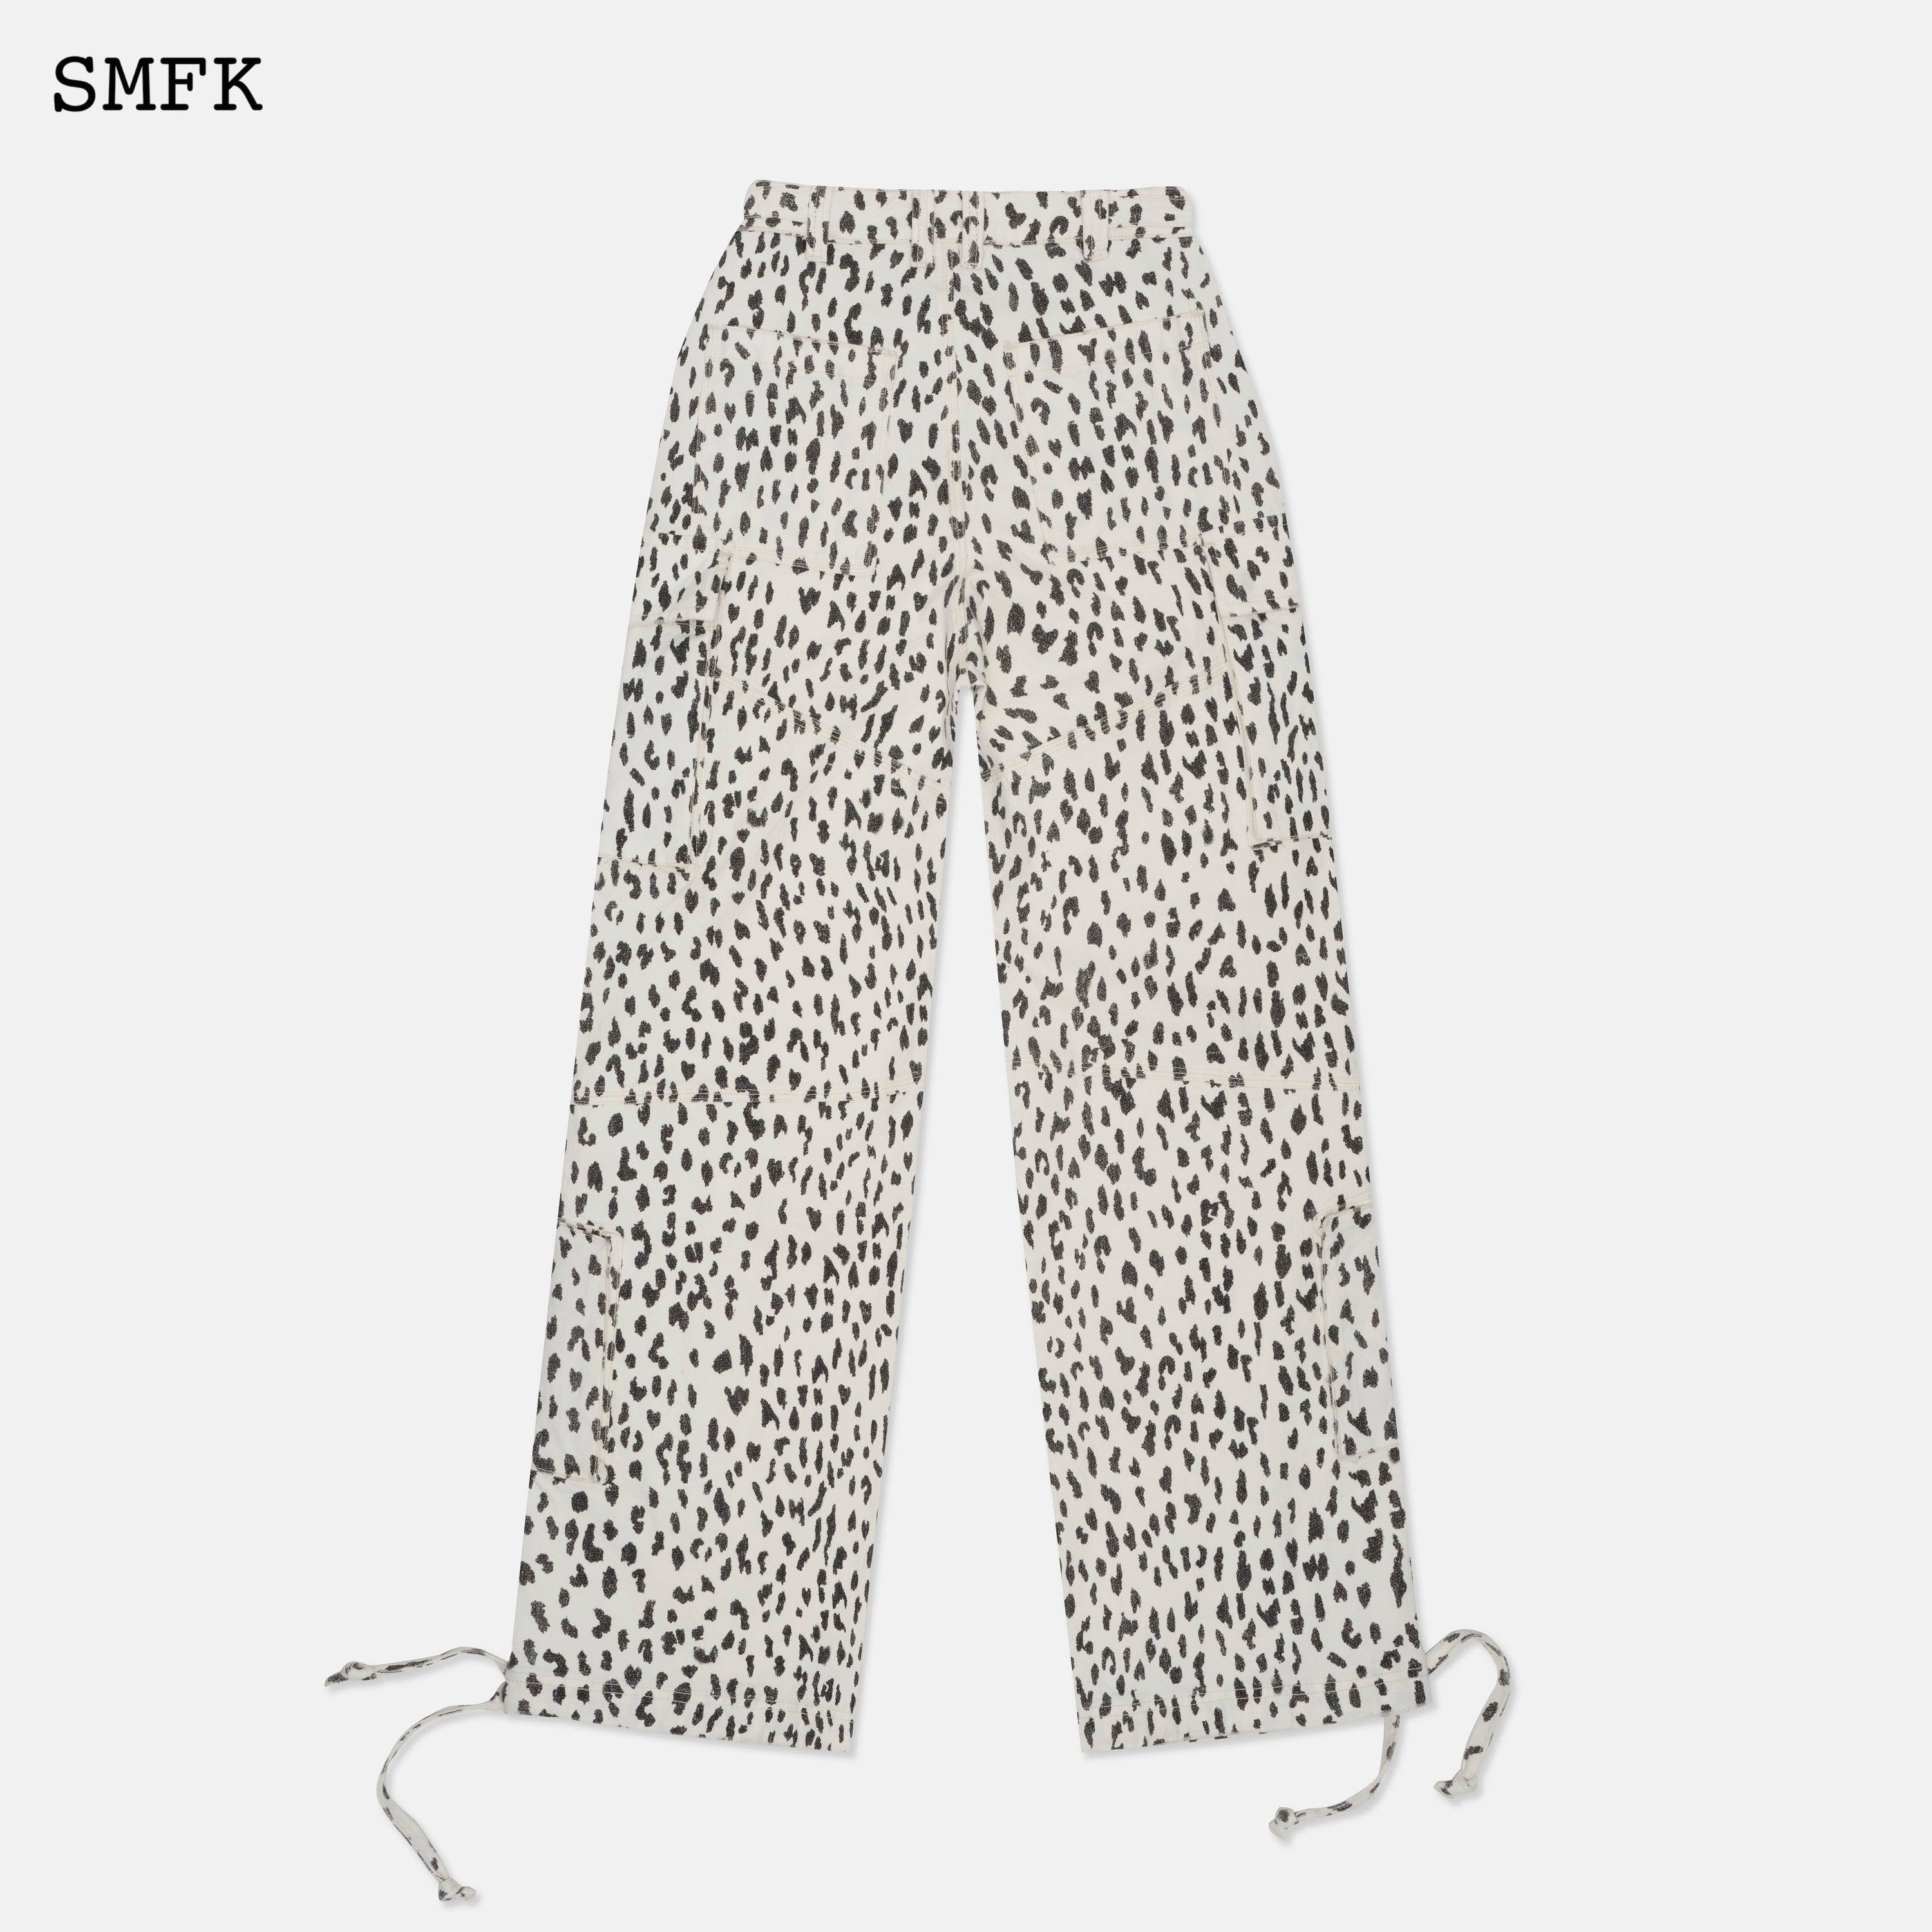 Wilderness White Leopard Climbing Trousers - SMFK Official